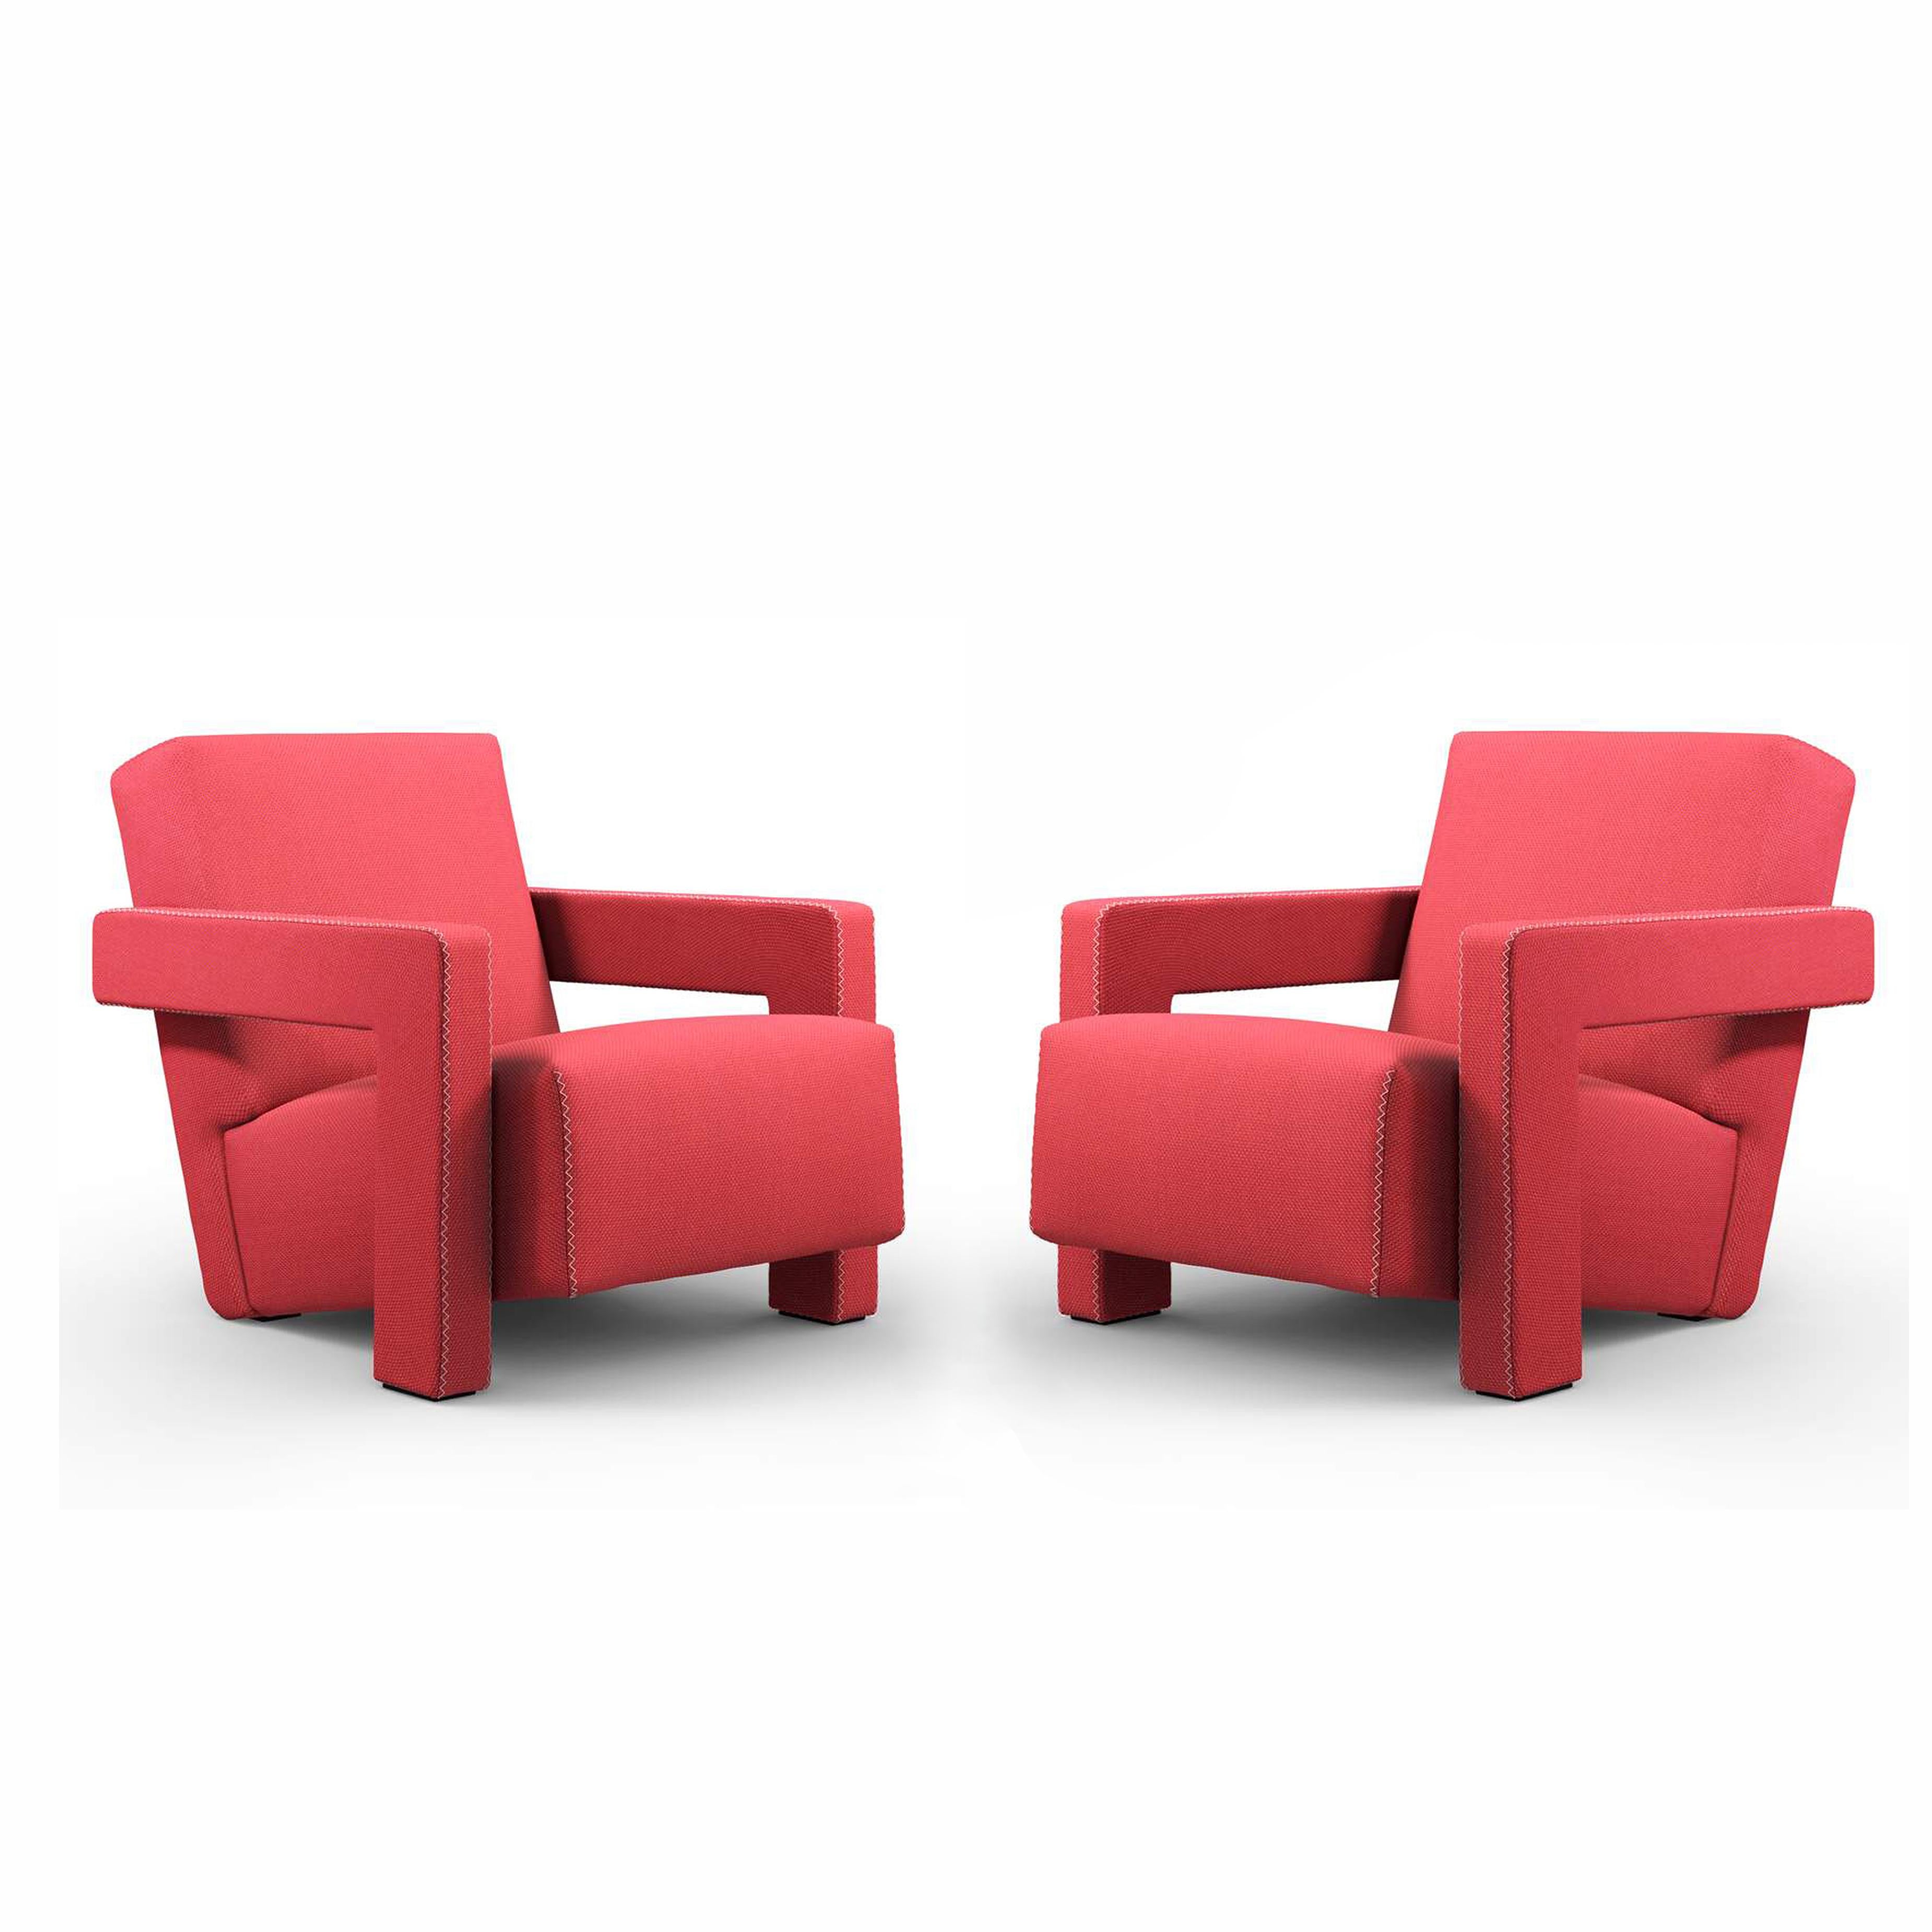 Italian Set of Two Utrech Armchair by Gerrit Thomas Rietveld for Cassina For Sale